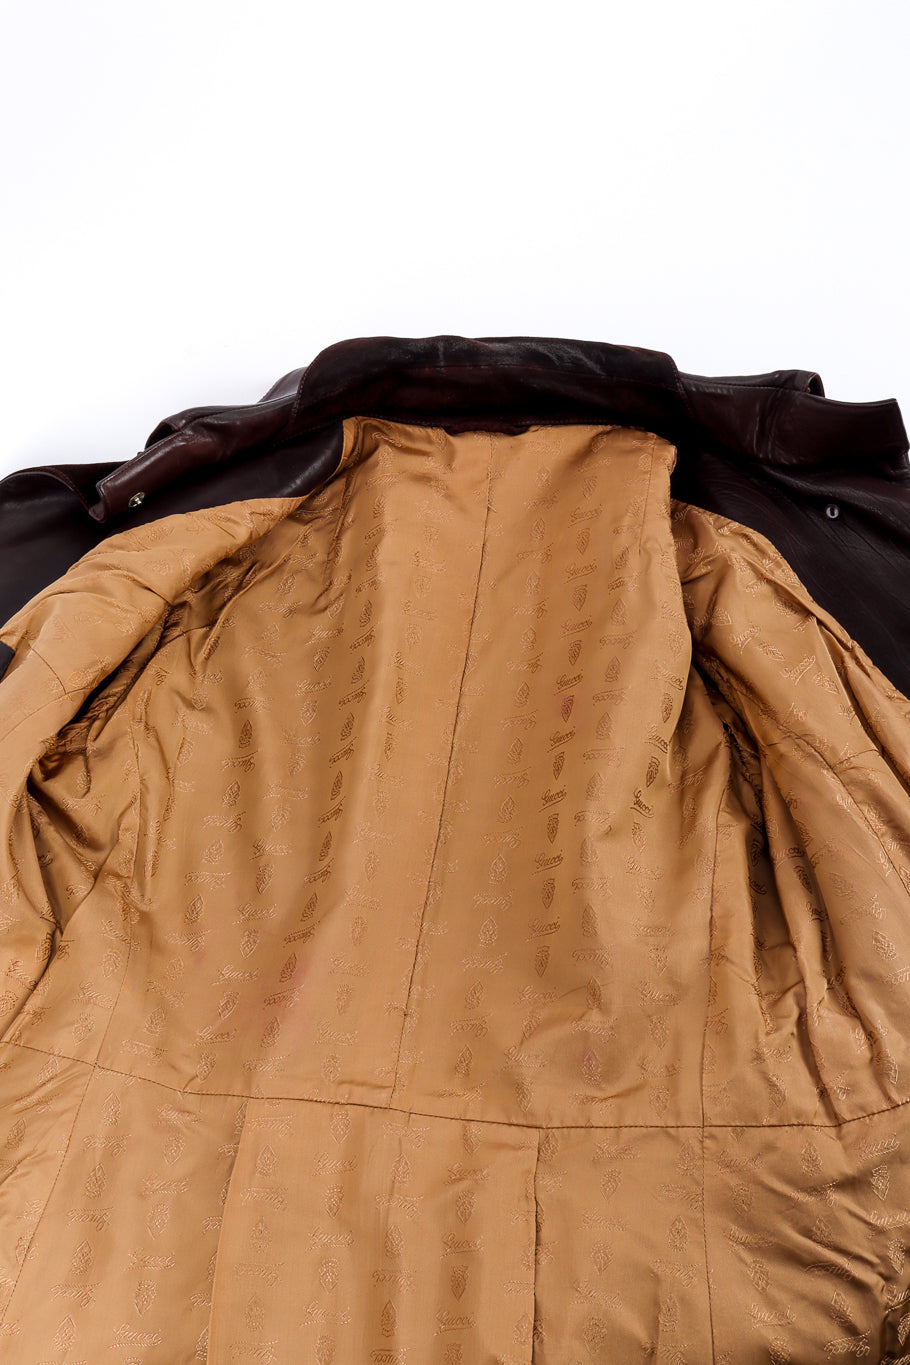 Vintage Gucci Suede and Leather Coat view of lining @recessla